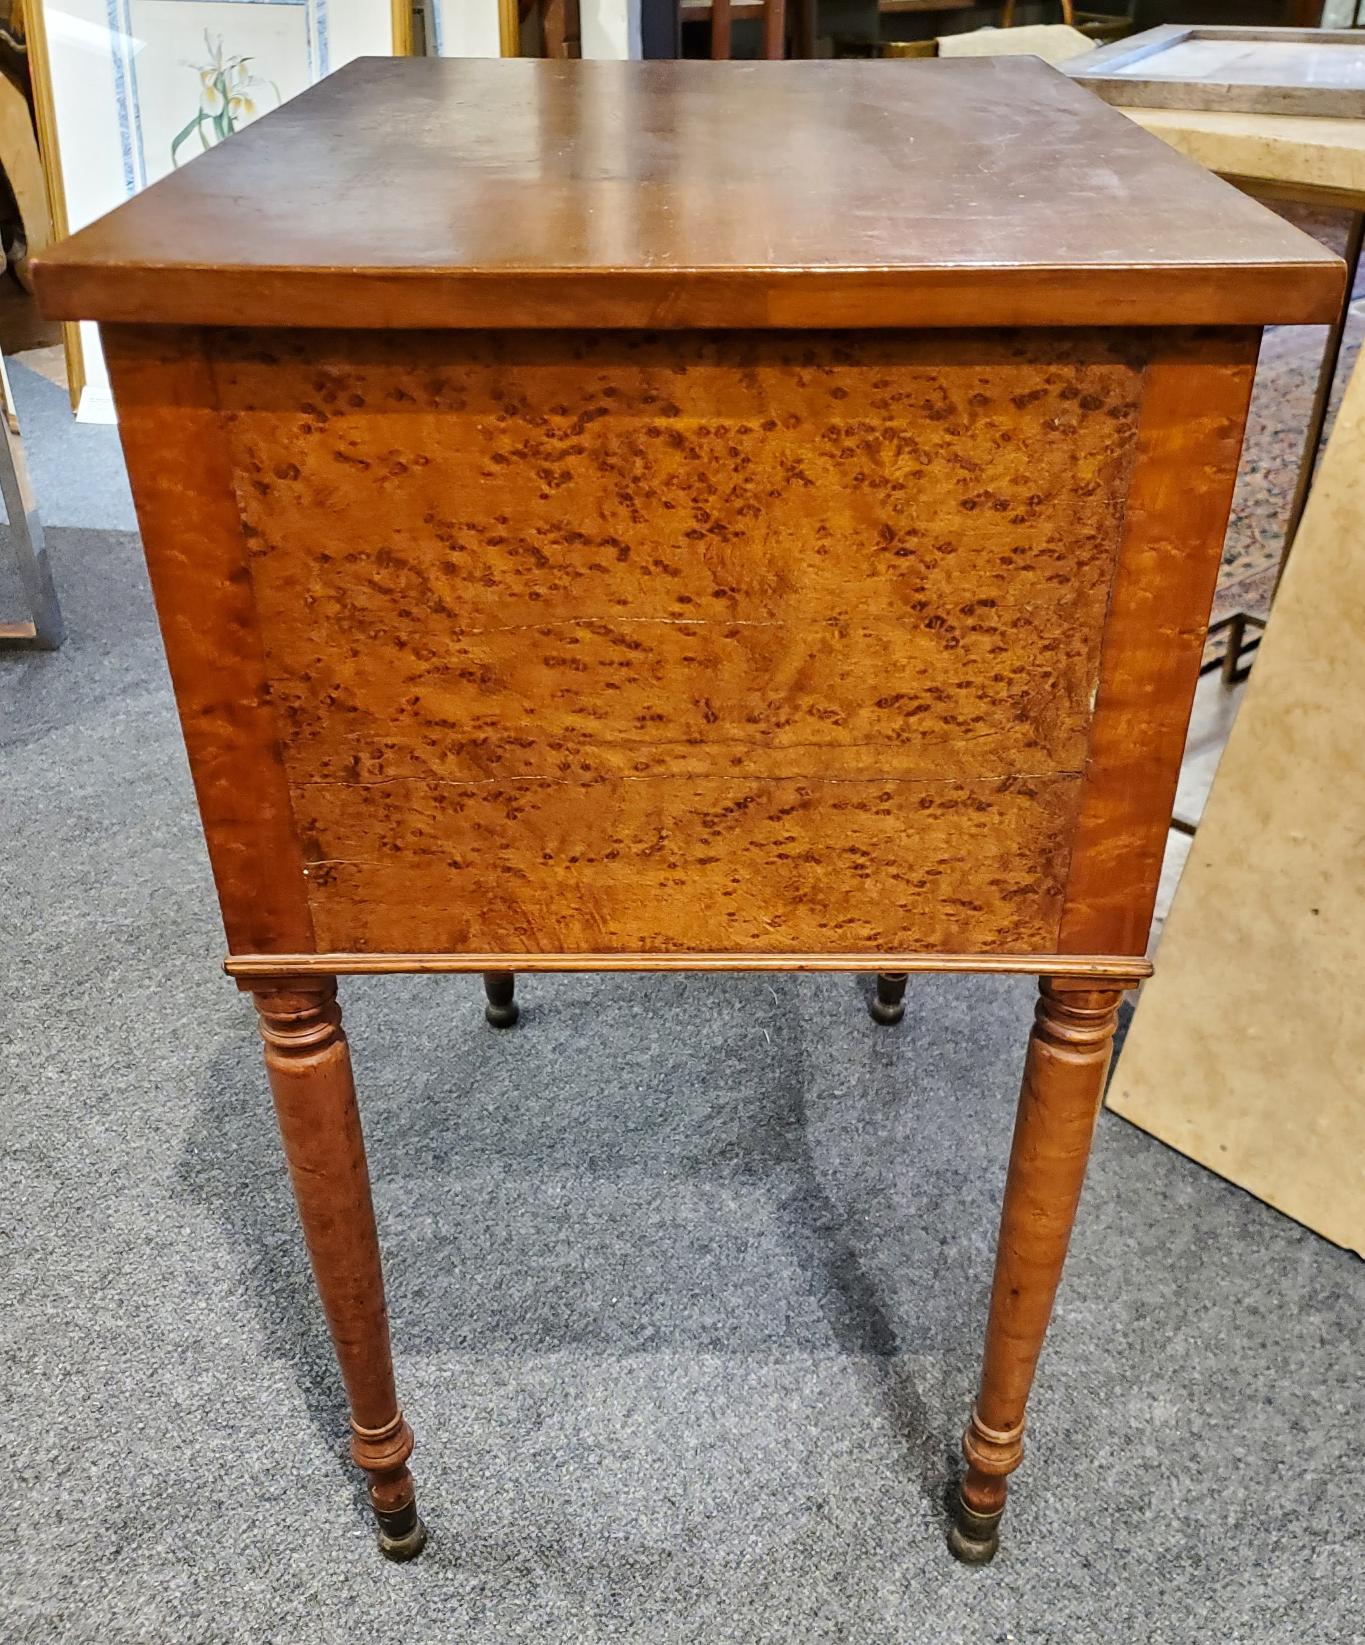 Neoclassical Mid 19th Century New England Birdseye Maple Side Table with Two Drawers For Sale